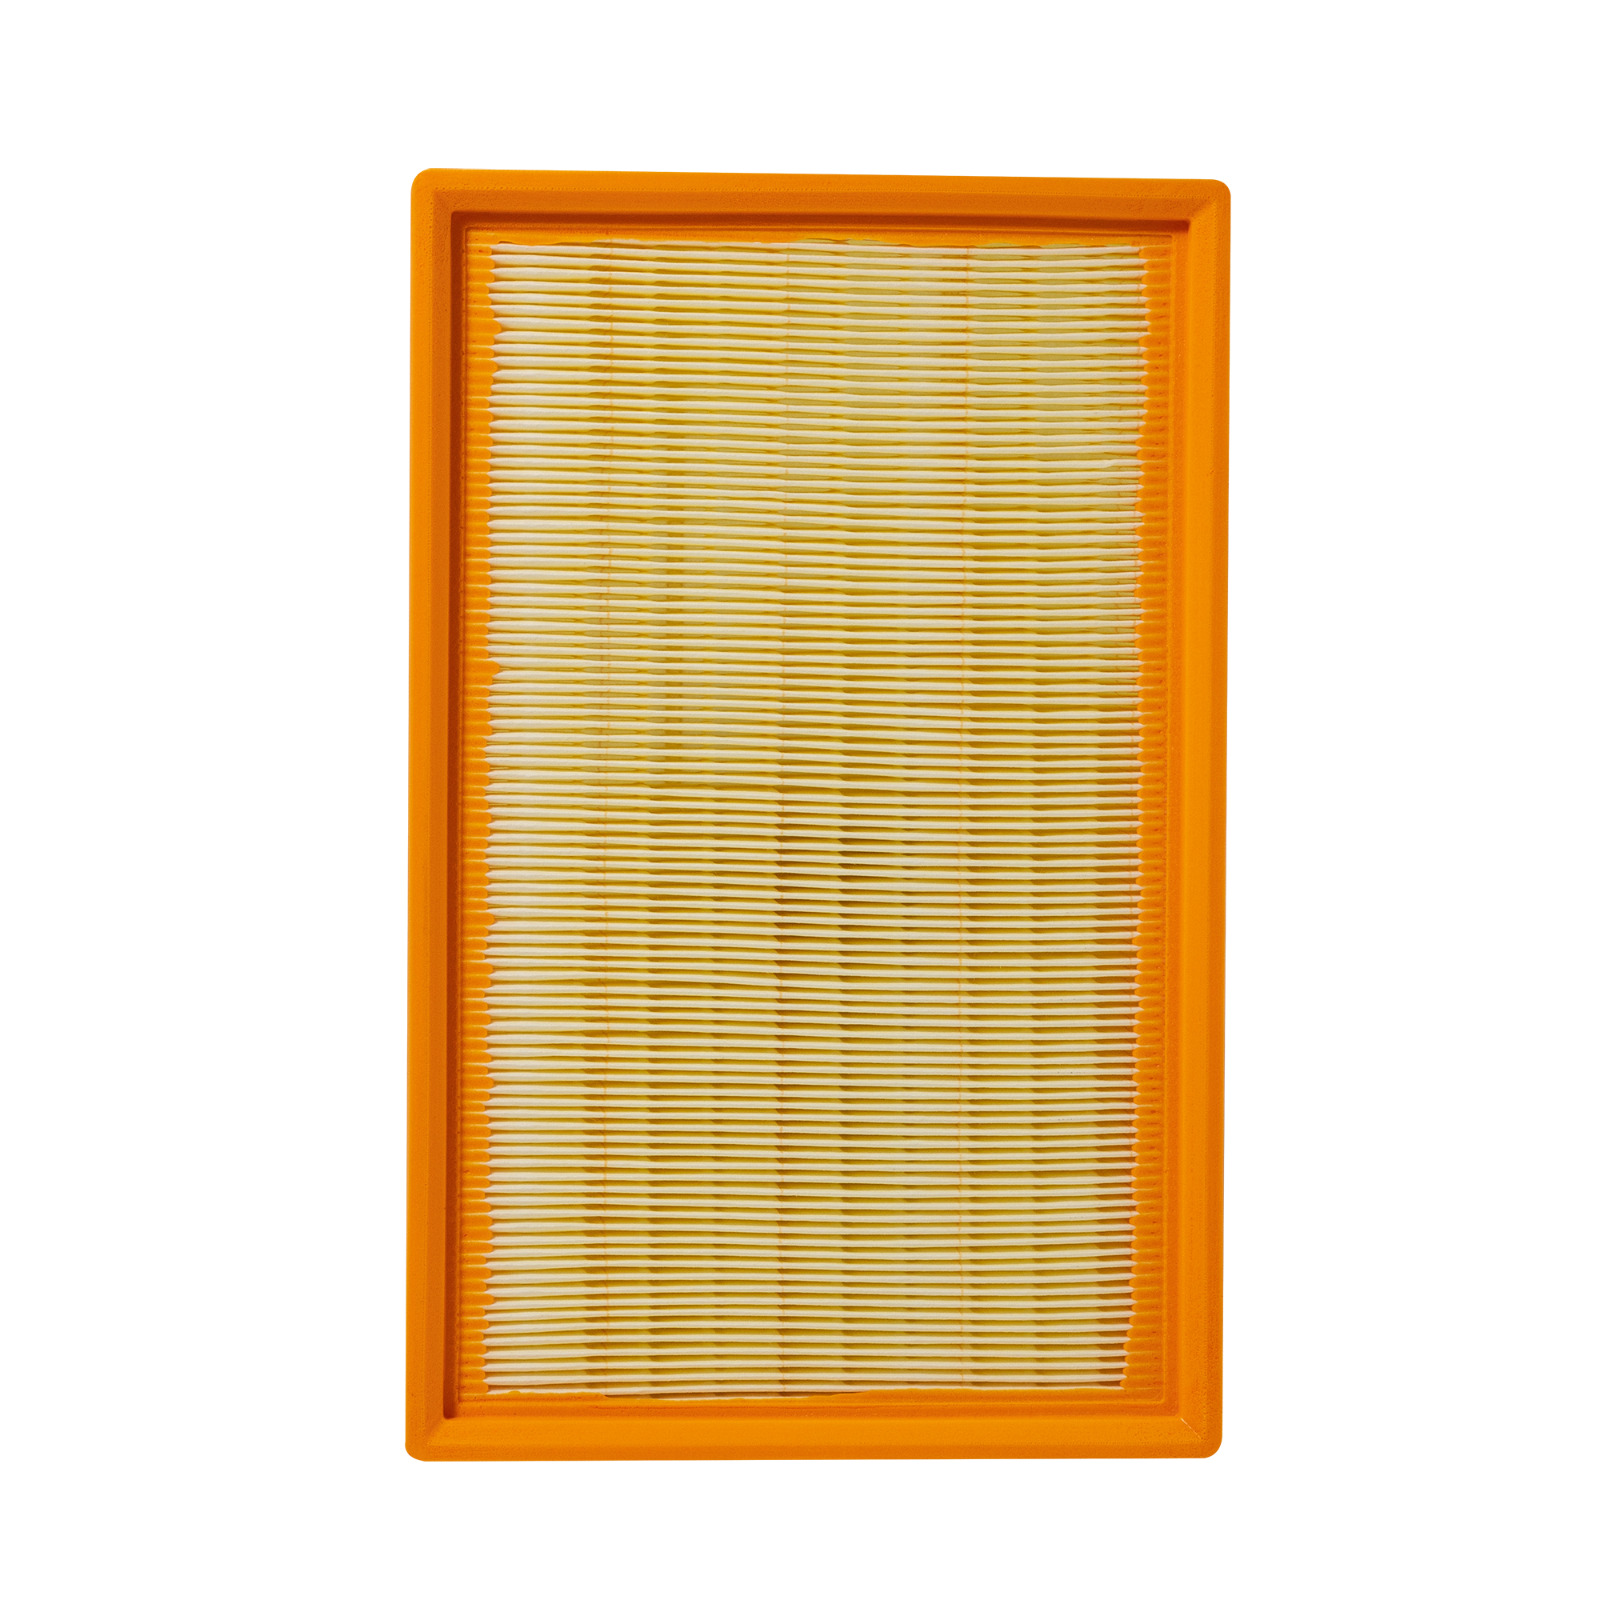 Marvel Engine Air Filter MRA4007 (15800986, 15893542) for Saturn Ion 2006-2007